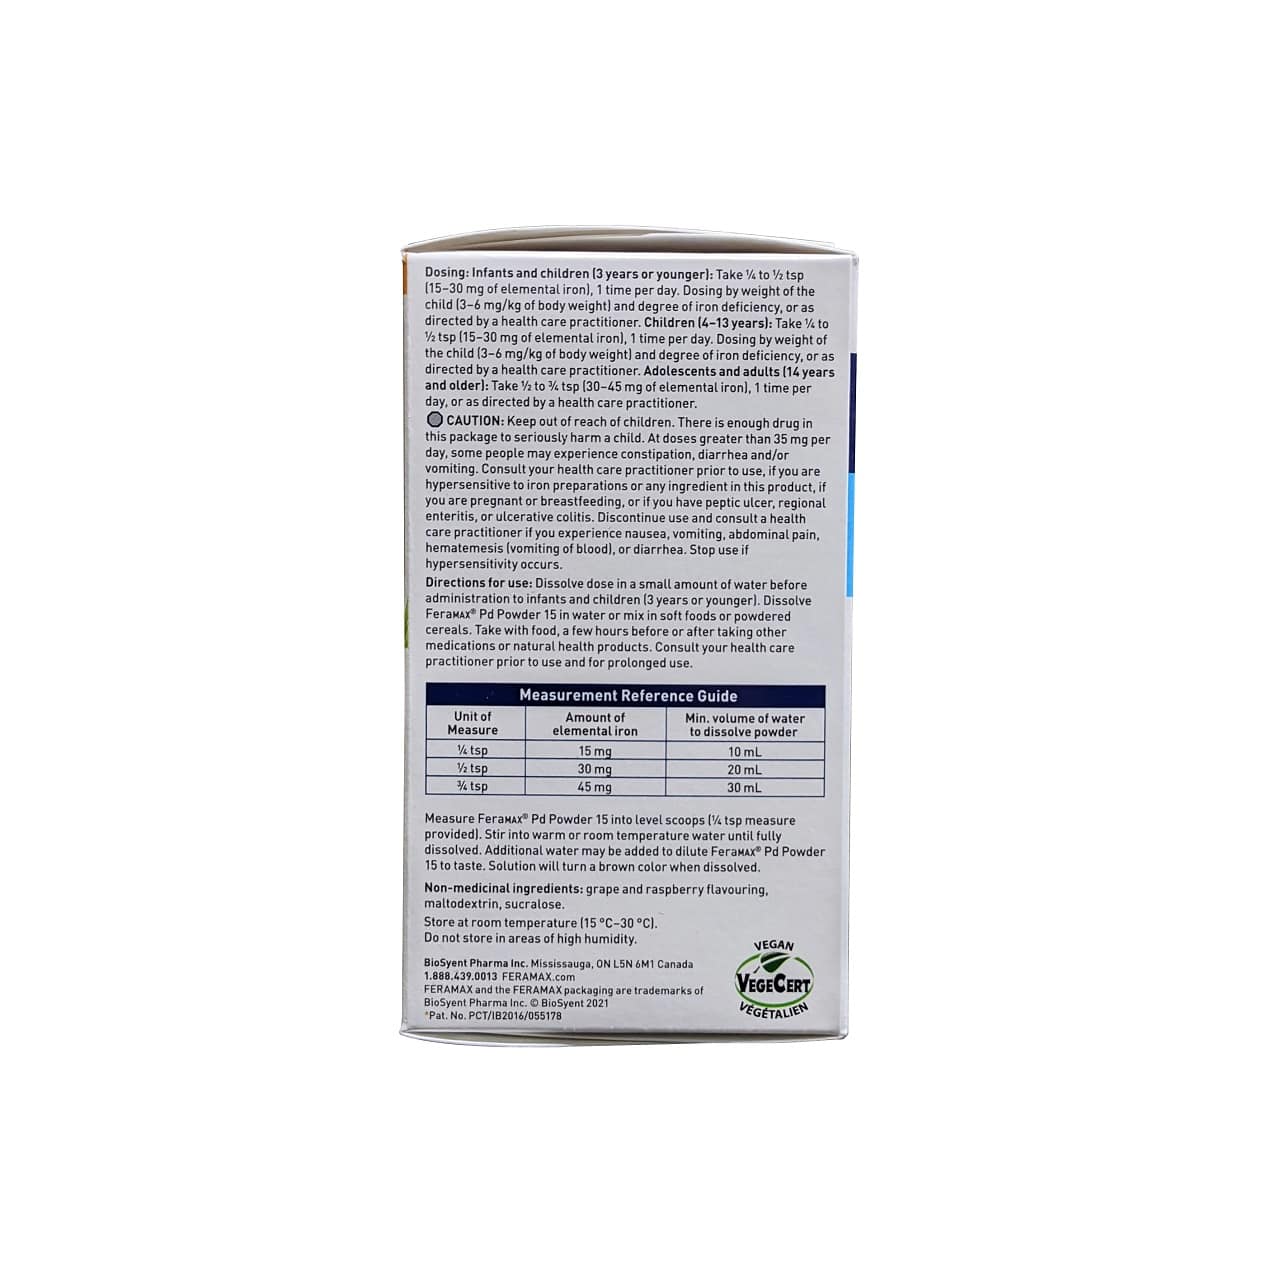 Dose. ingredients, cautions for FeraMAX PD Powder 15 mg (83 grams) in English